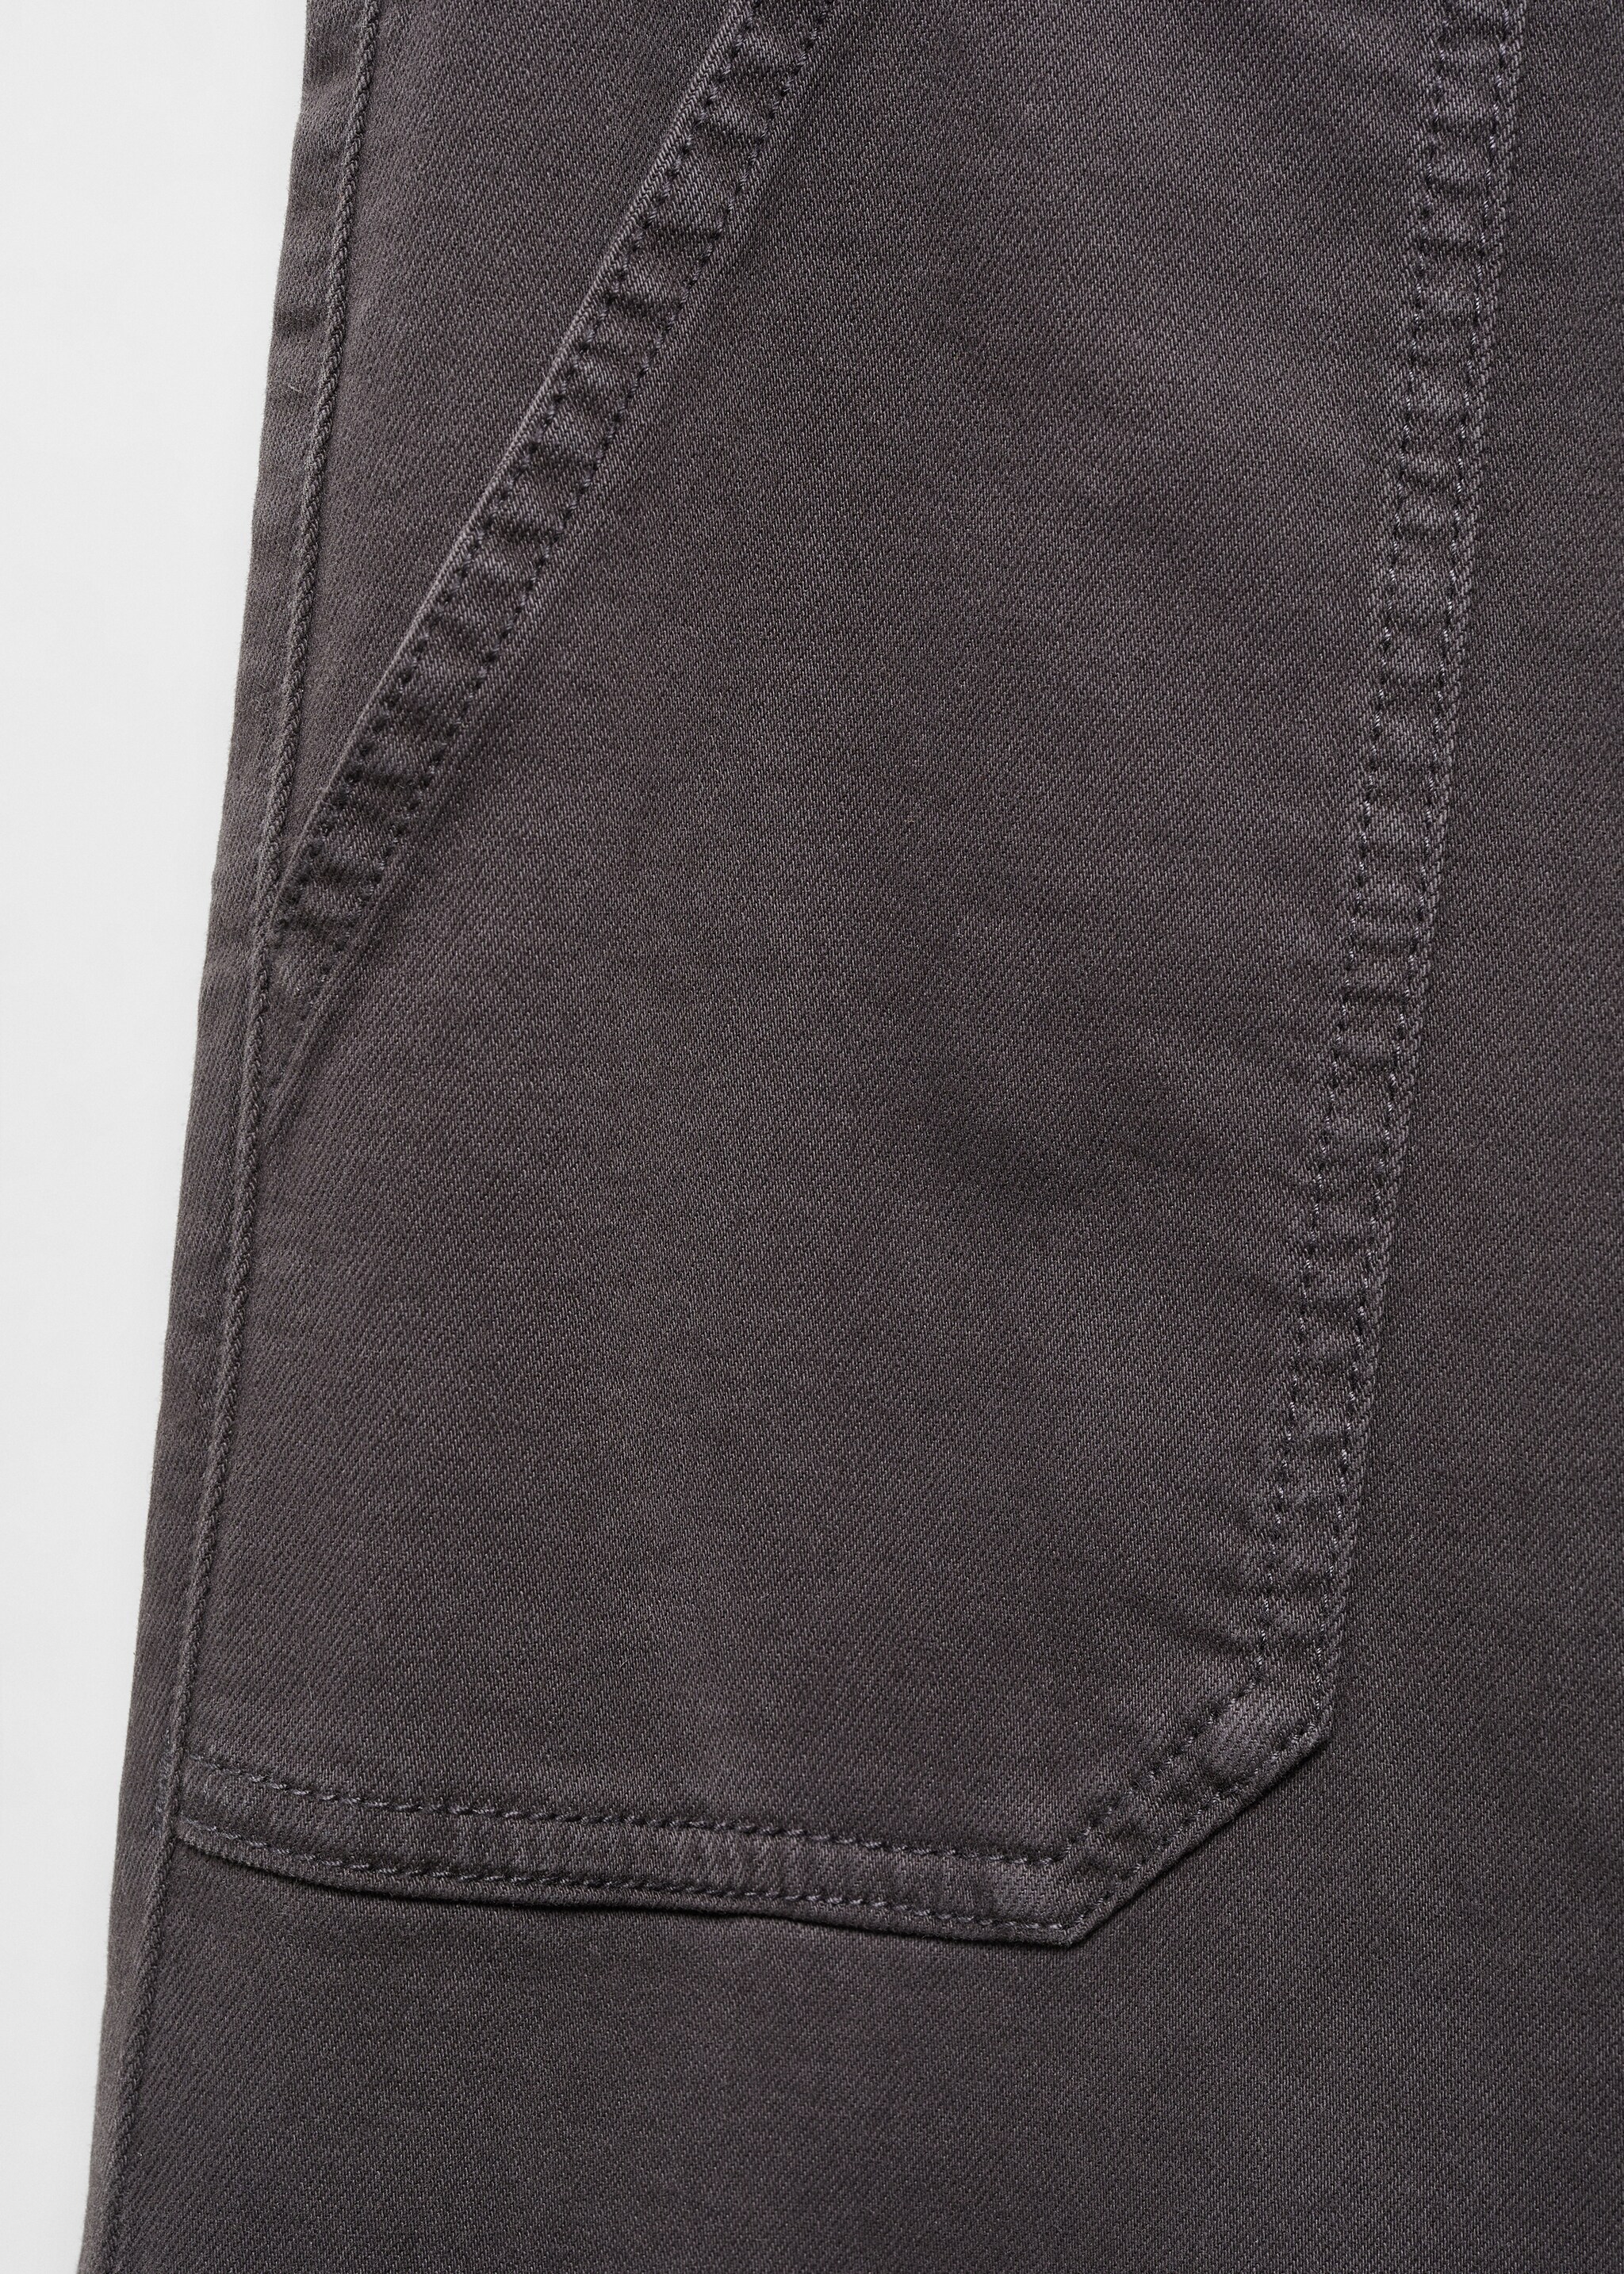 Culotte trousers with pockets - Details of the article 8